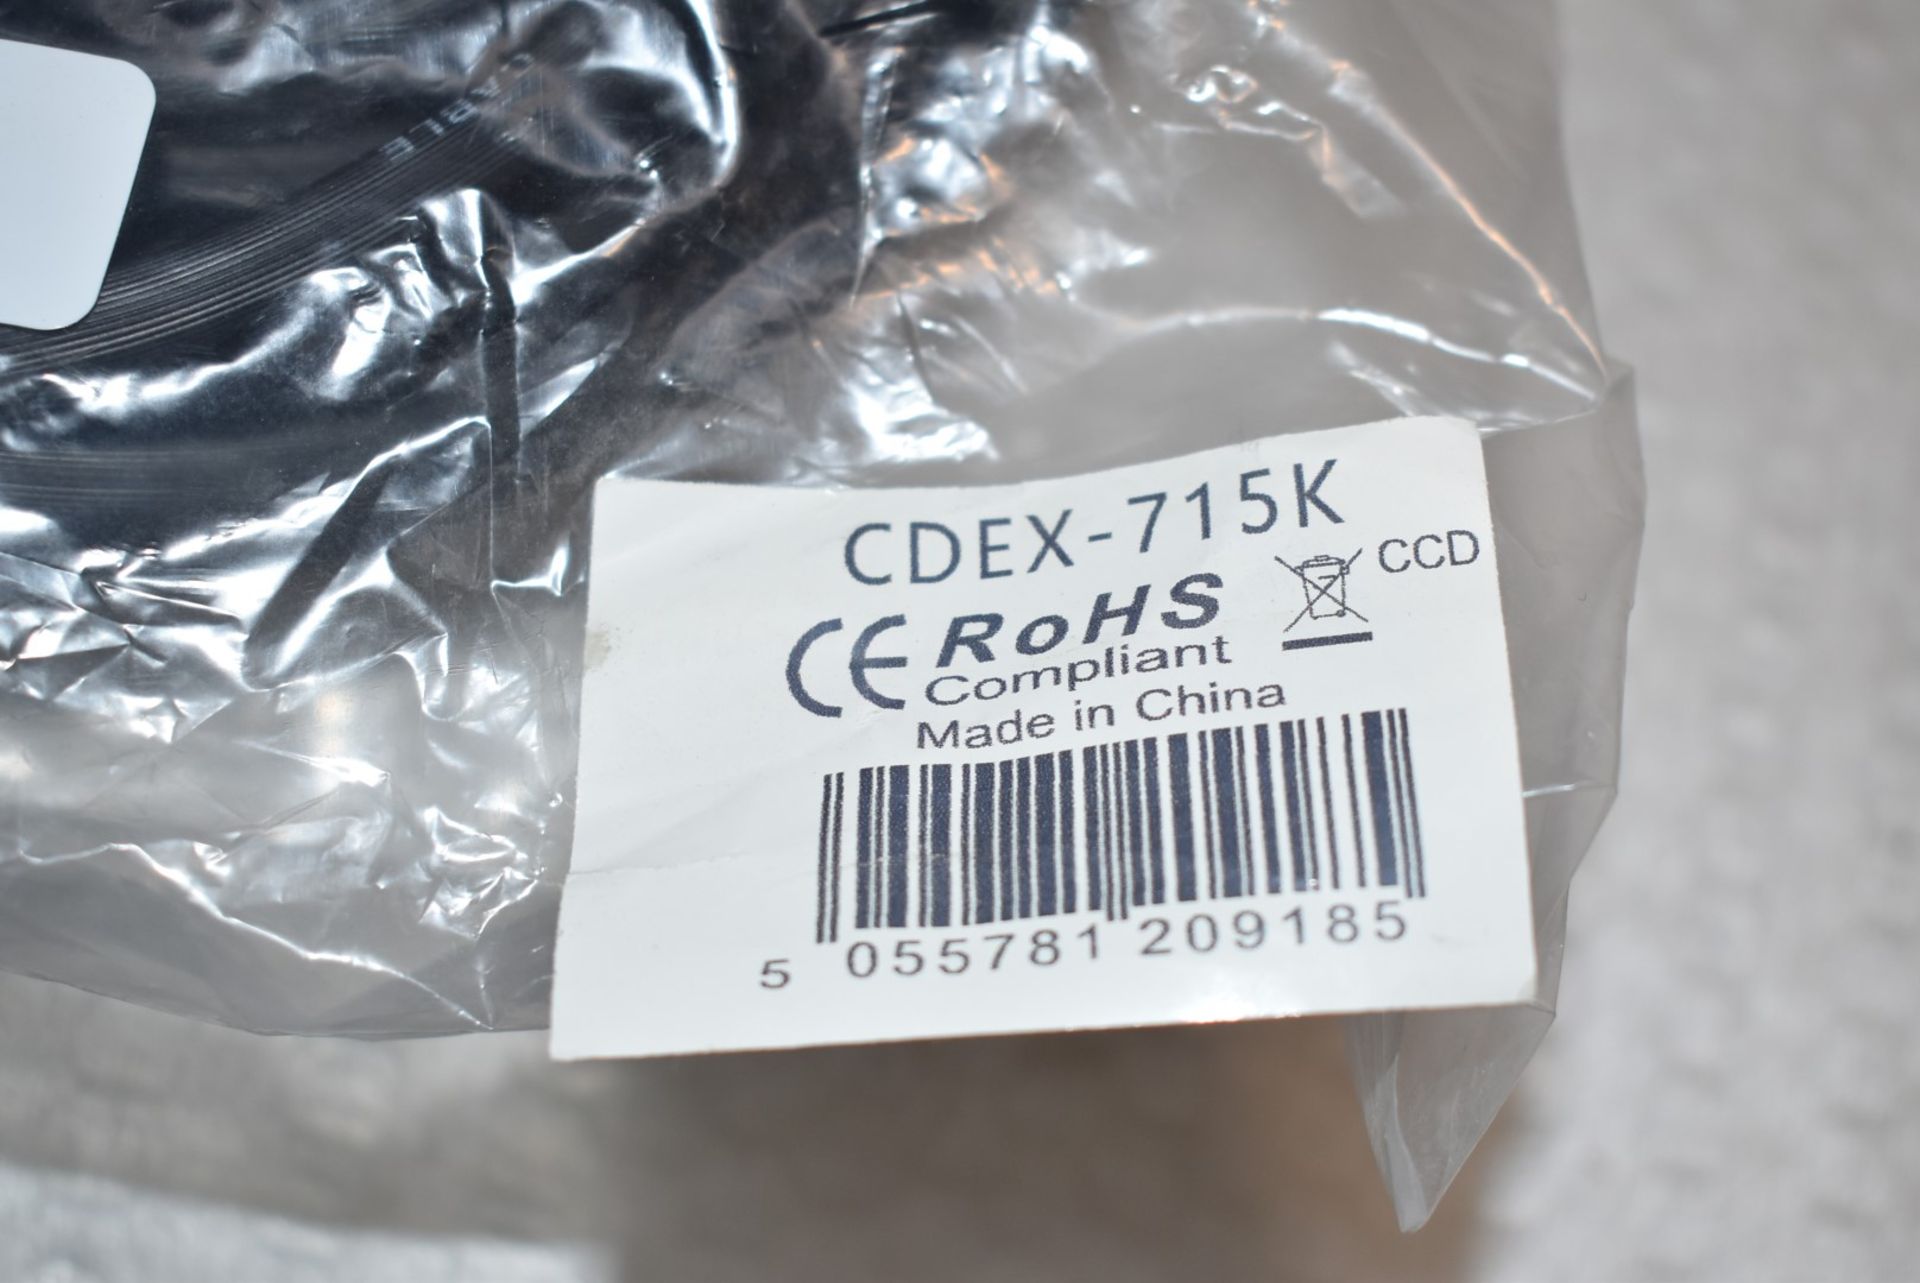 3 x CDEX 715K Cables Direct VGA Cables - 15 Meter Length - New in Packets - RRP £70 - Image 3 of 7